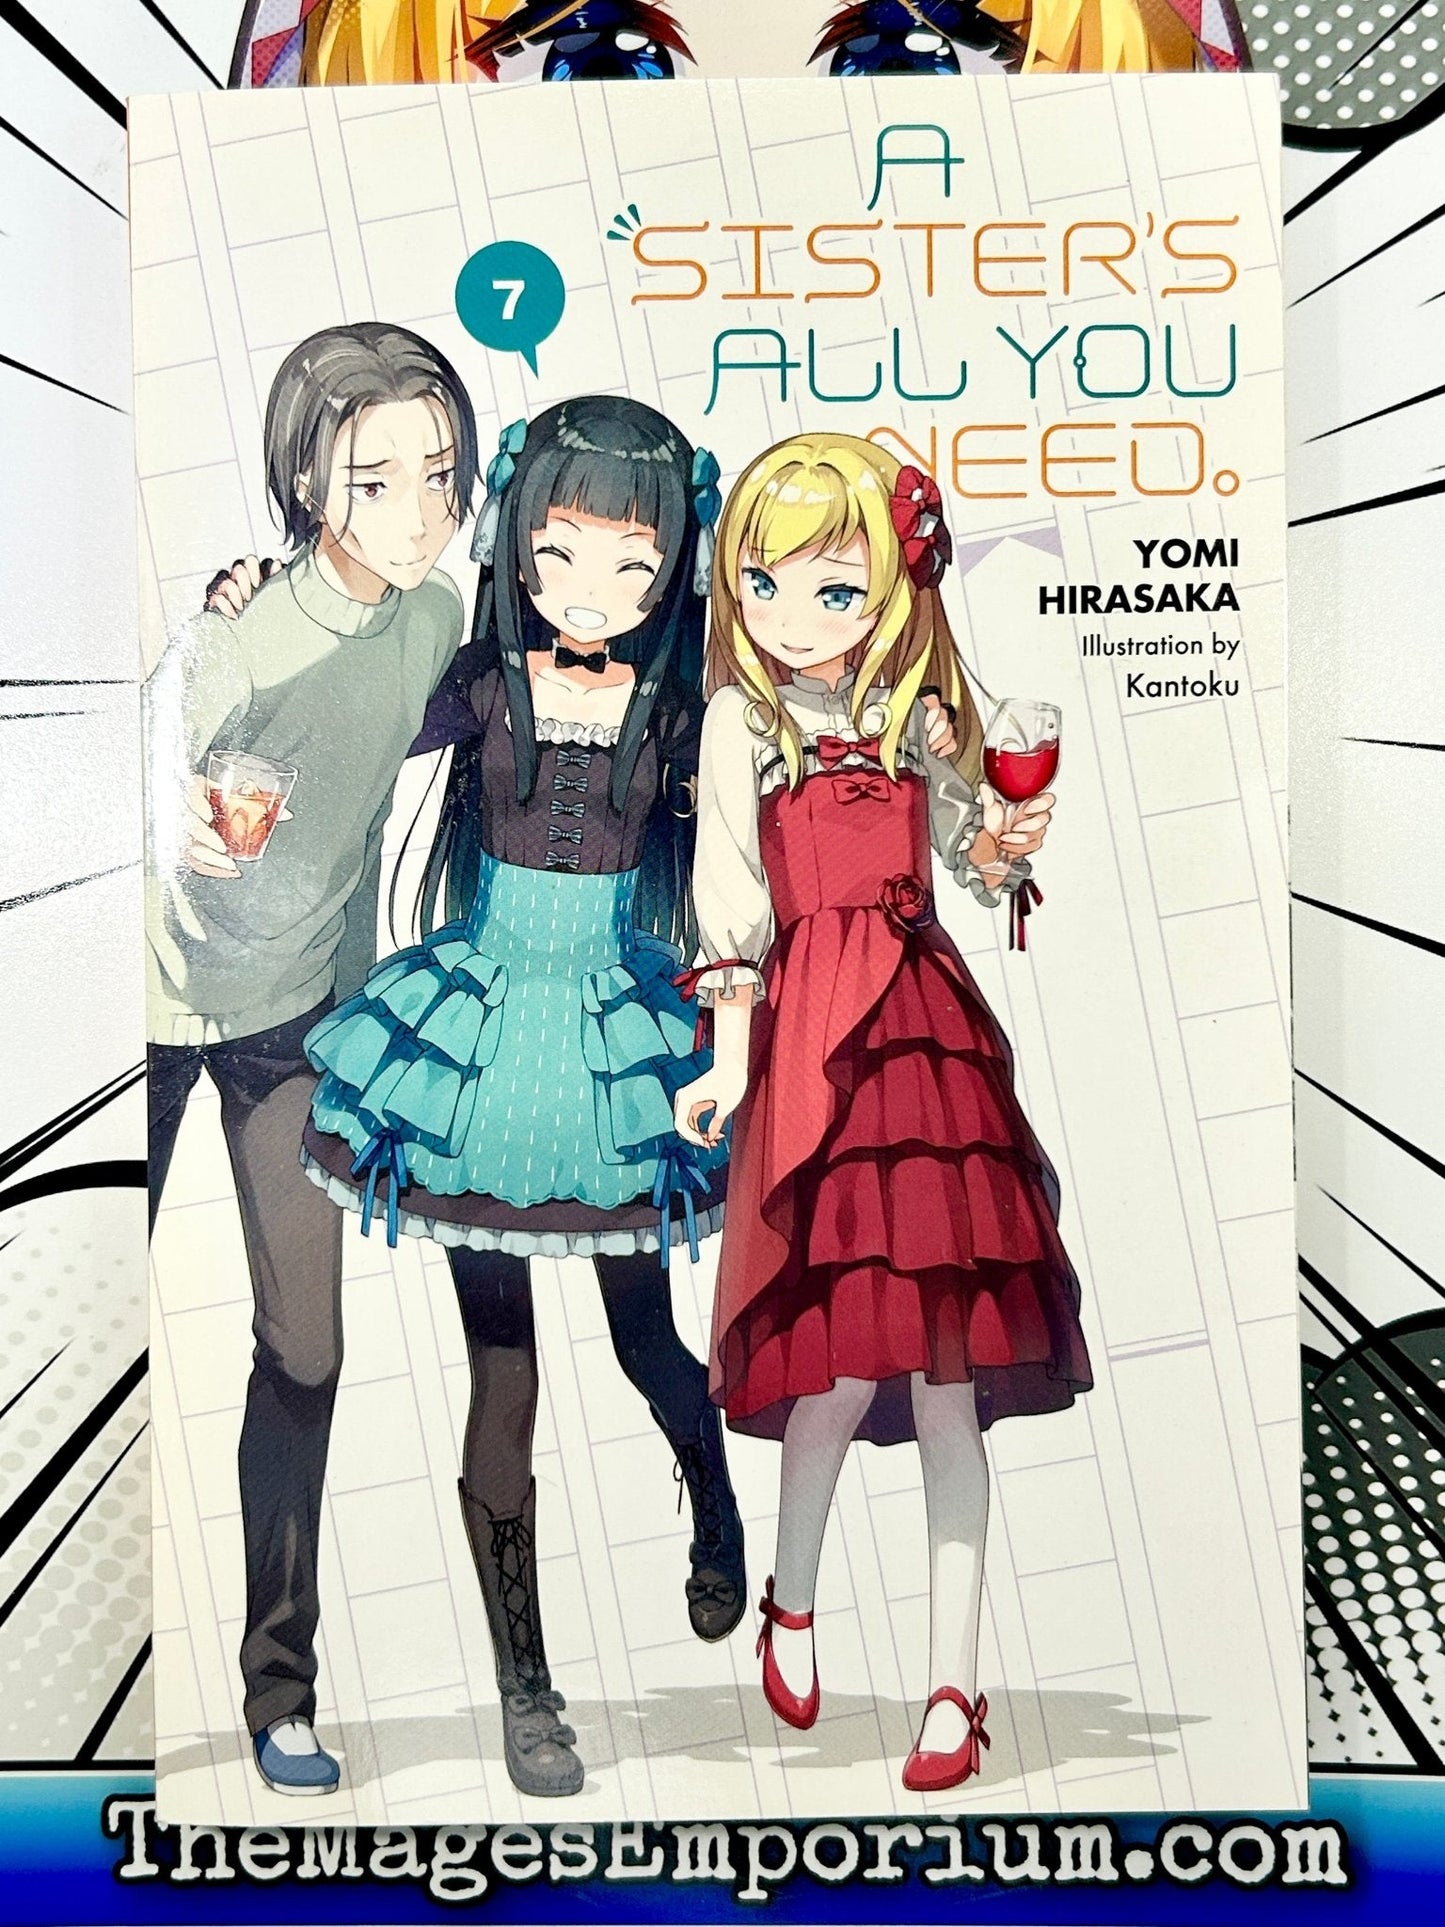 A Sister's All You Need Vol 7